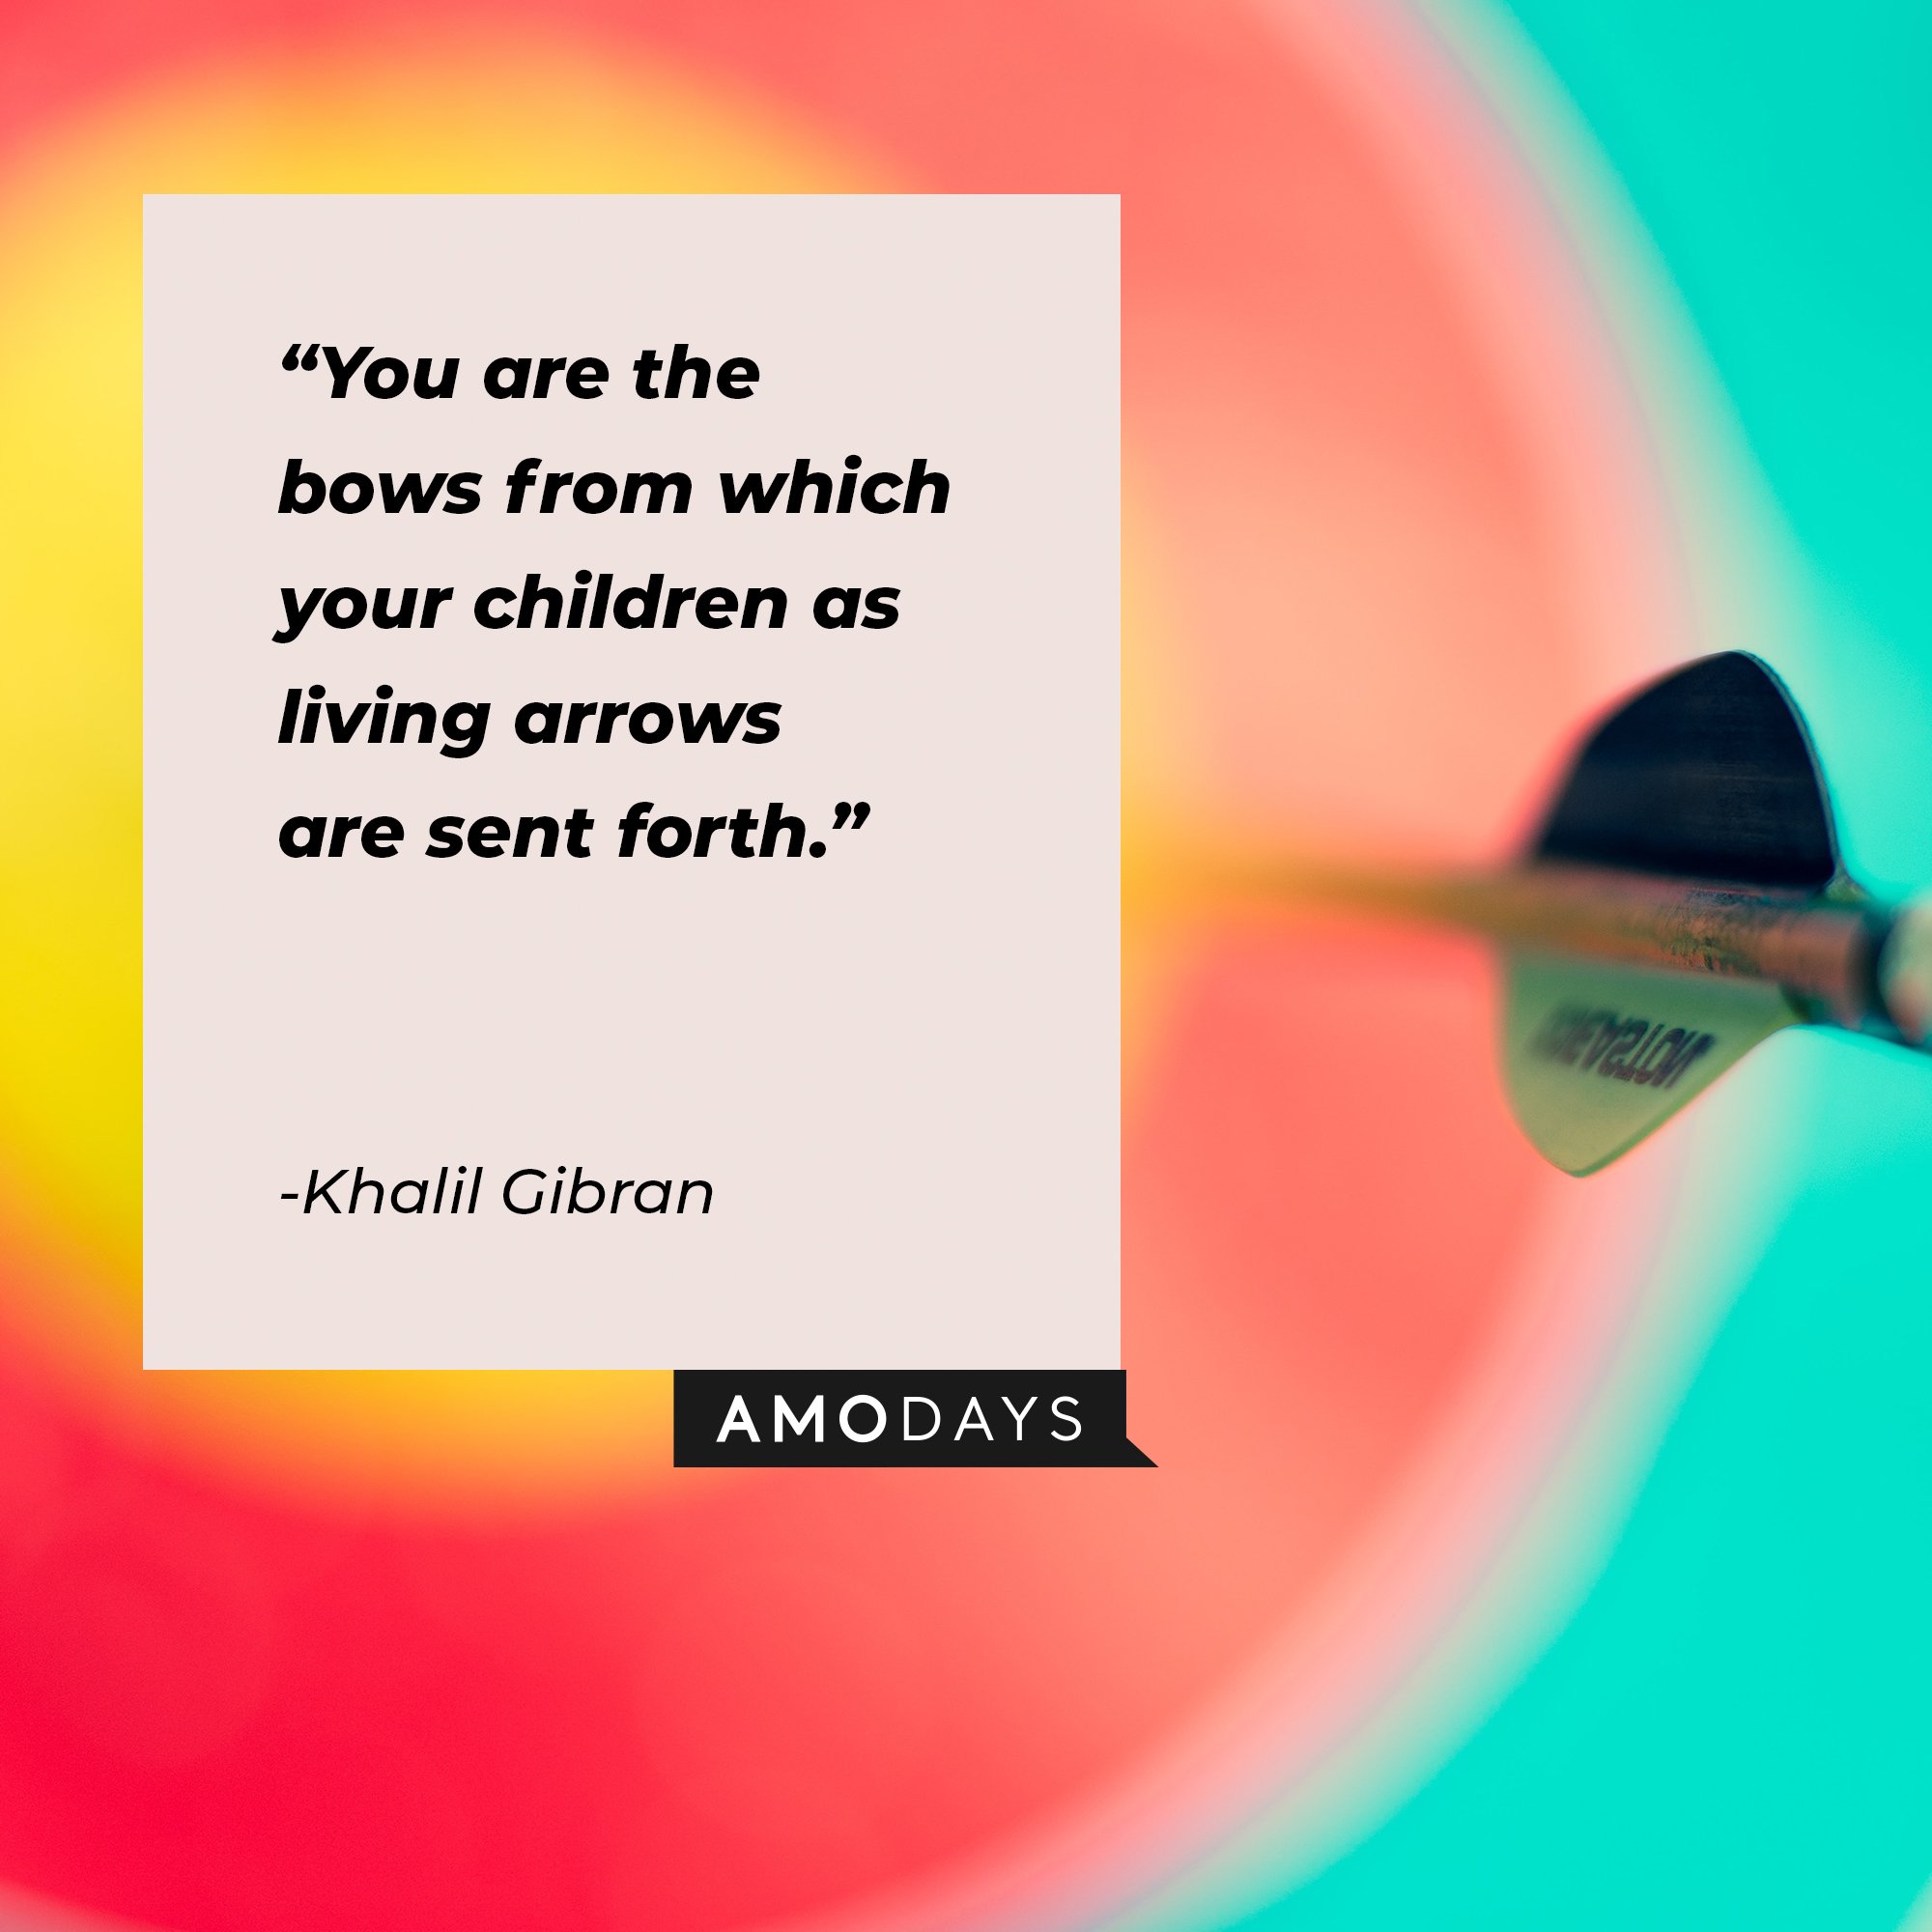 Khalil Gibran’s quote: “You are the bows from which your children as living arrows are sent forth.” | Image: AmoDays